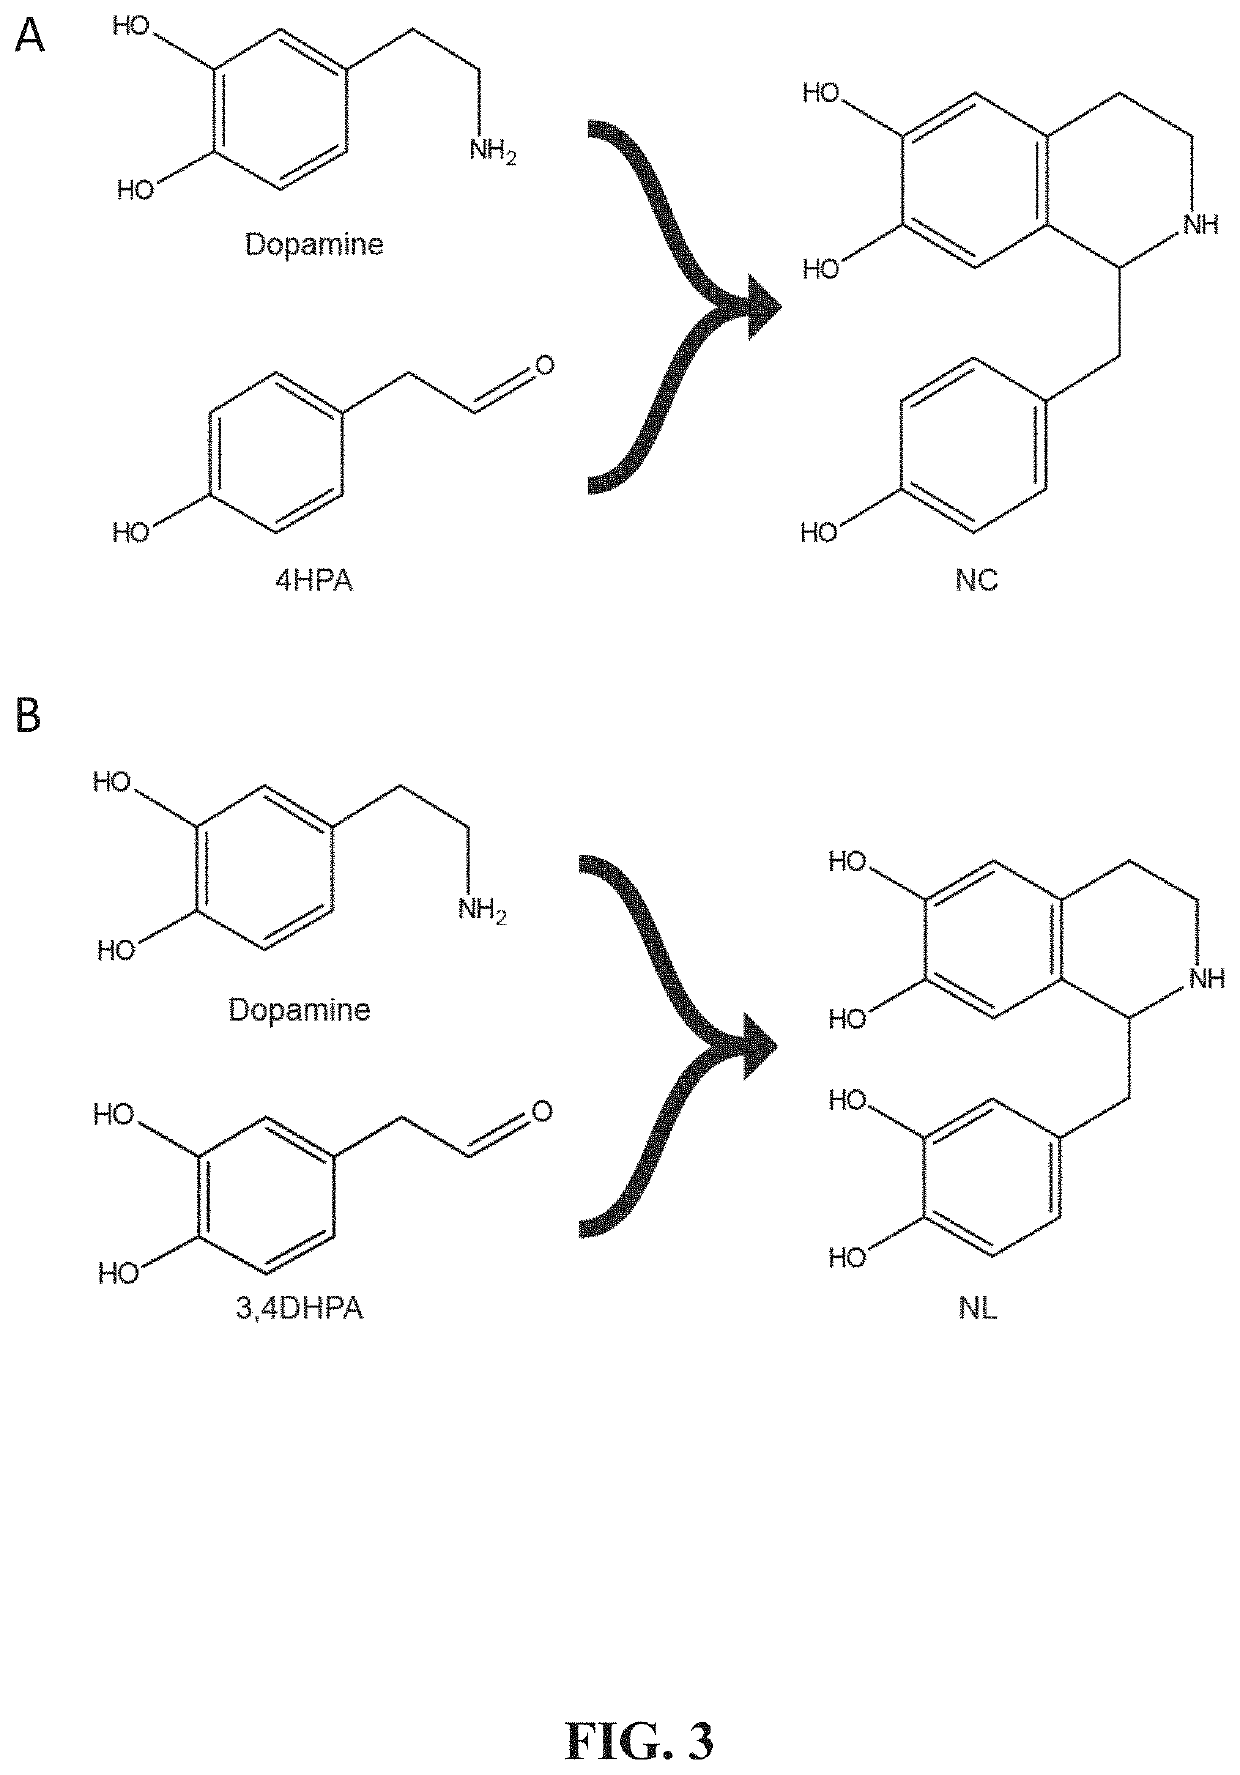 Benzylisoquinoline alkaloid (BIA) precursor producing microbes, and methods of making and using the same